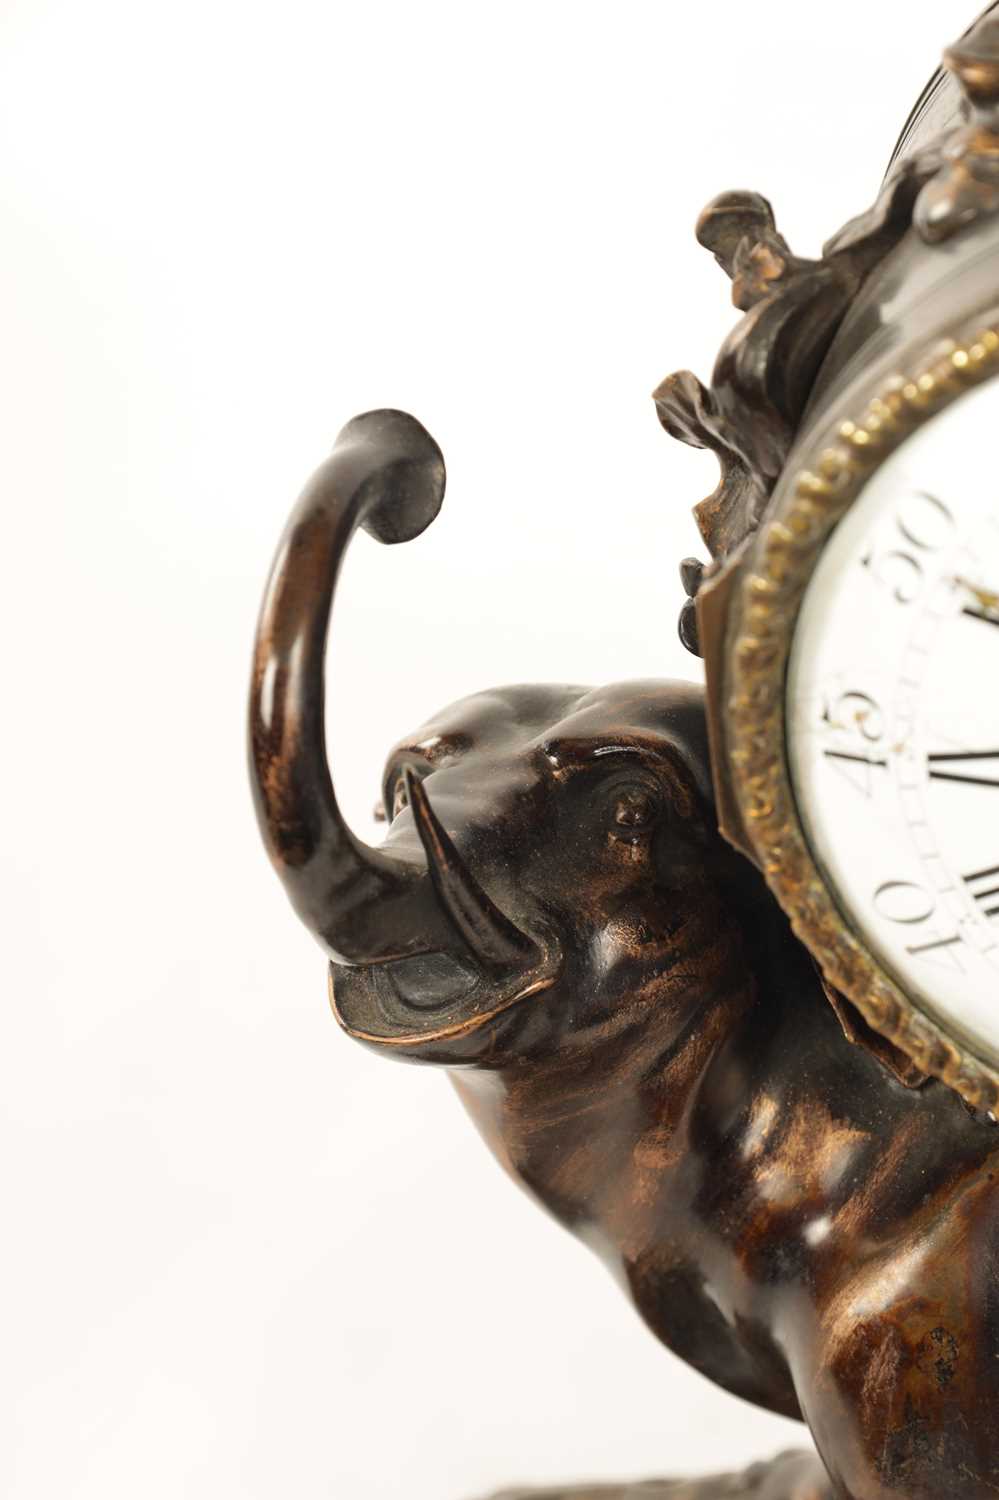 THUILLIER, A PARIS. A LATE 19TH CENTURY FRENCH PATINATED BRONZE MANTEL CLOCK - Image 5 of 14